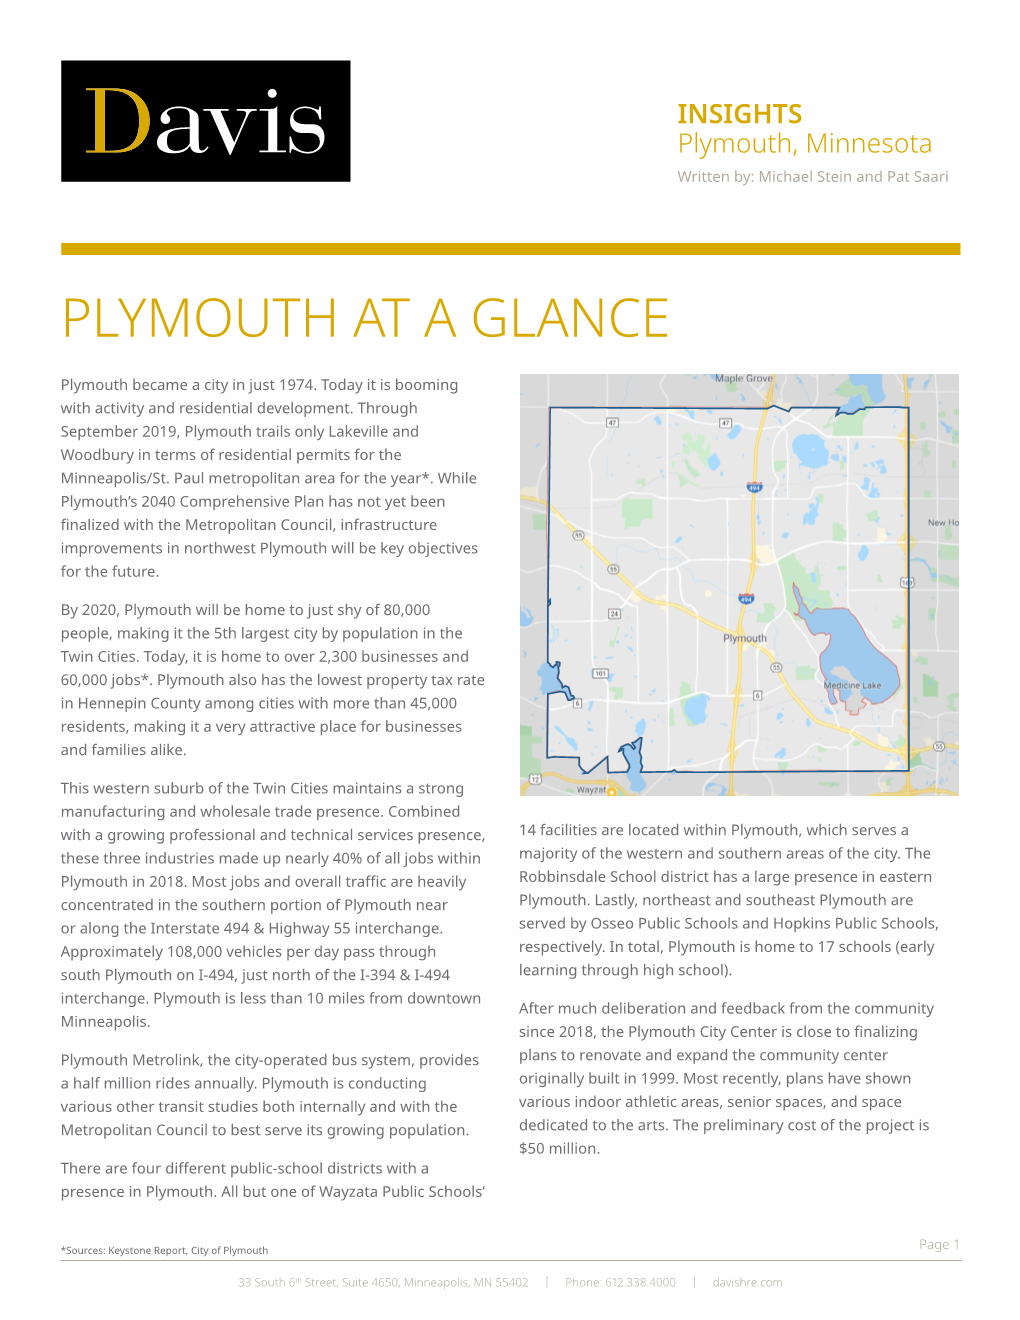 Plymouth at a Glance